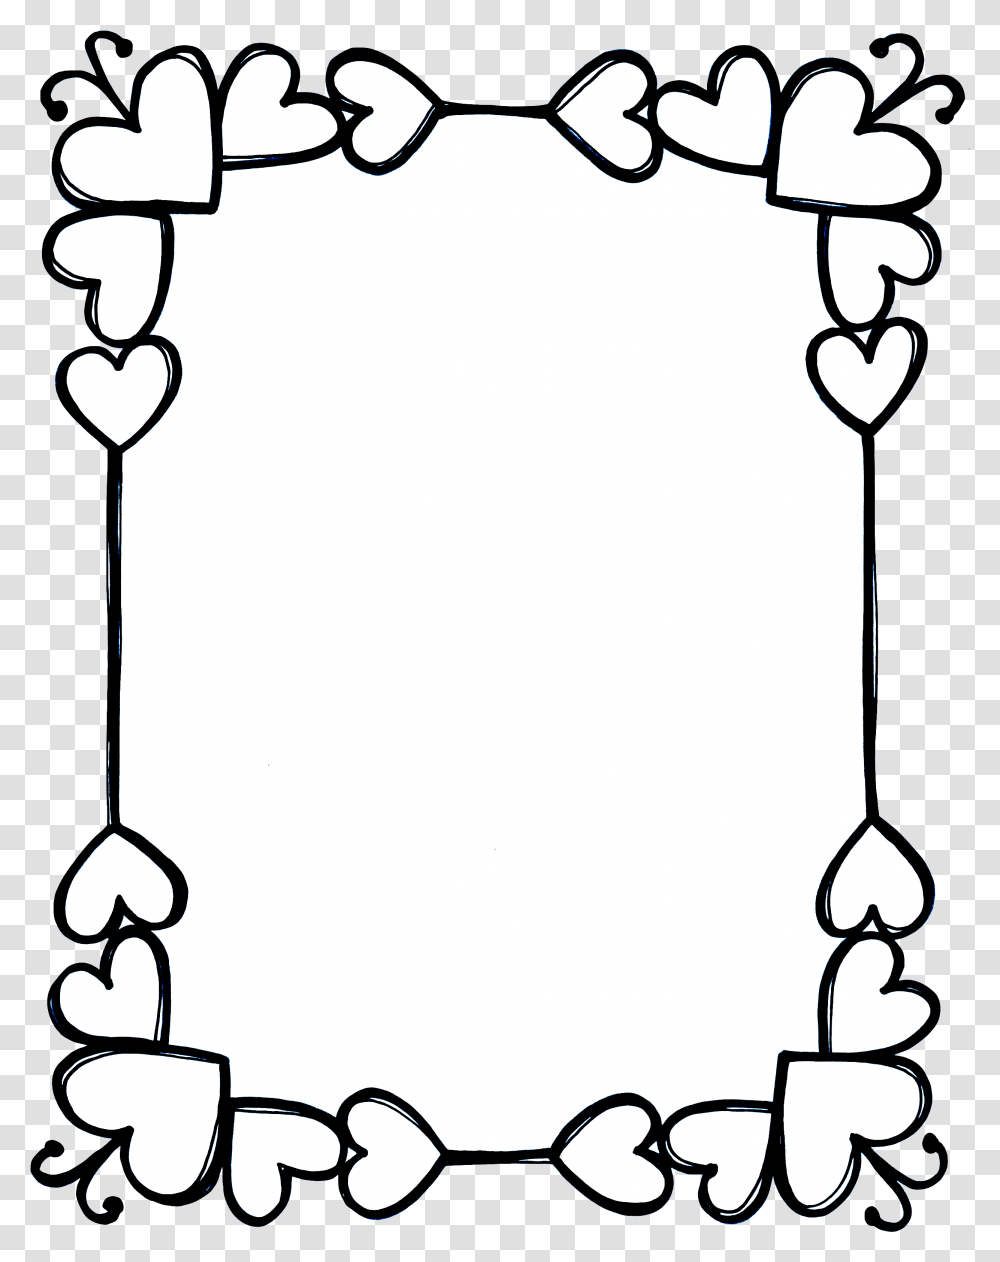 Chart Paper Border Design Clipart Download Border Designs For Project, Bow, Stencil, Mirror, Oval Transparent Png